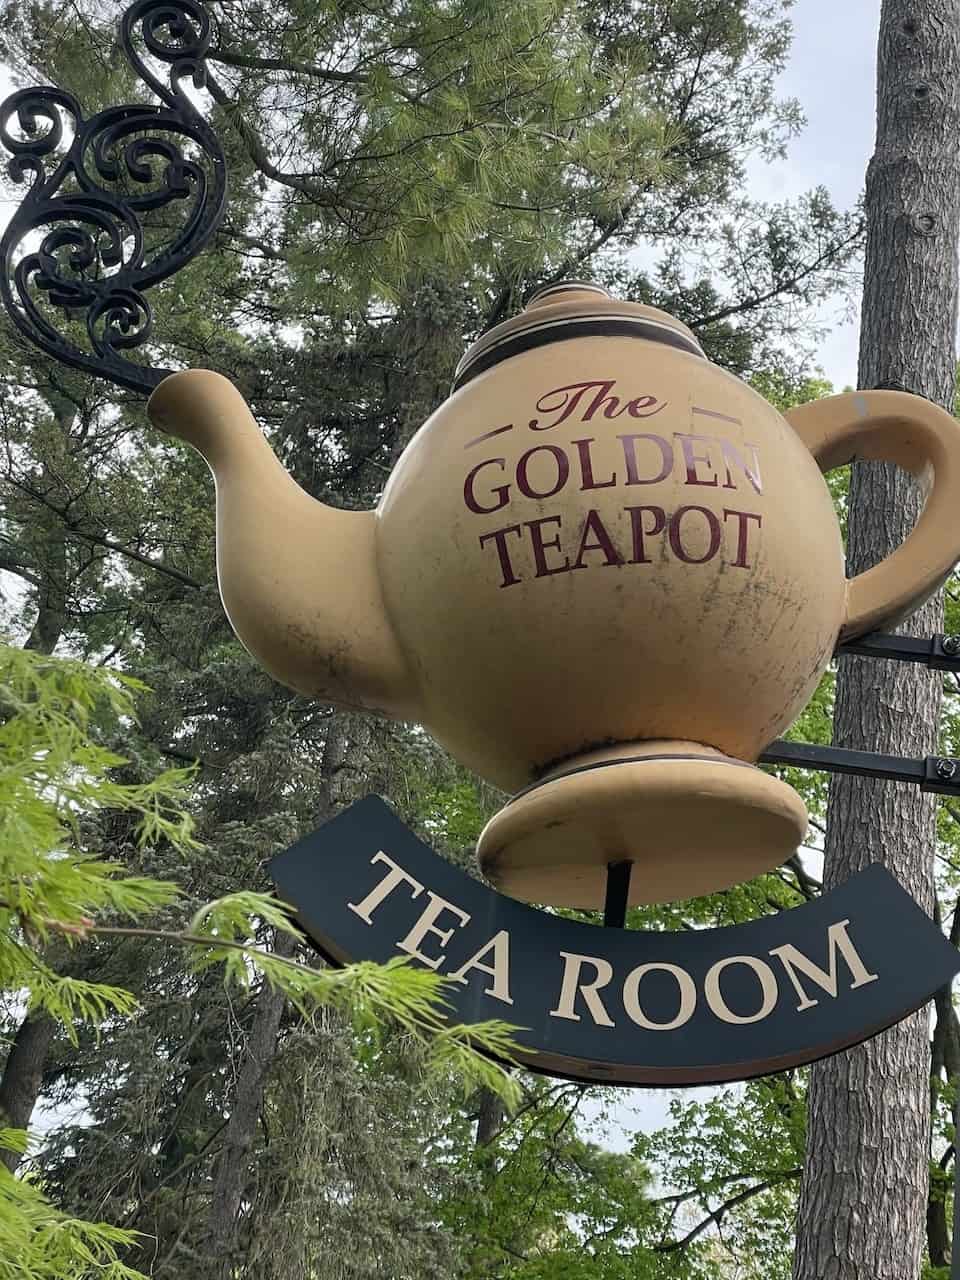 Golden Teapot Sign - The Glenhyrst Gardens covers quite a large area of gardens. The physical Golden Teapot helps direct visitors to the tea room.